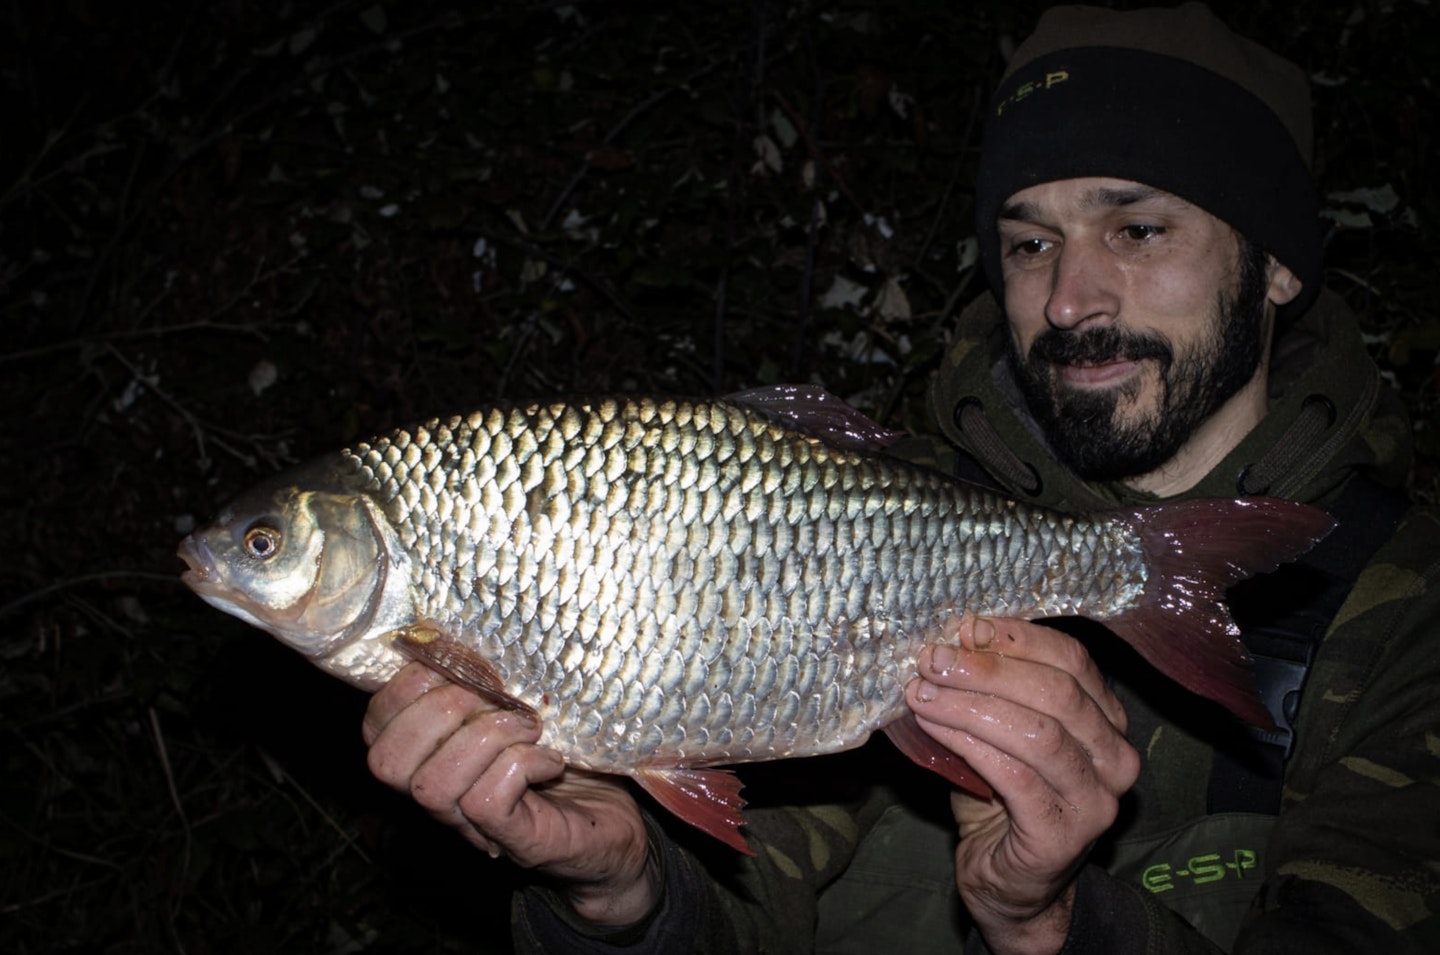 This fish, the larger of Dan’s amazing brace, is a mere 2oz shy of the long-standing British record